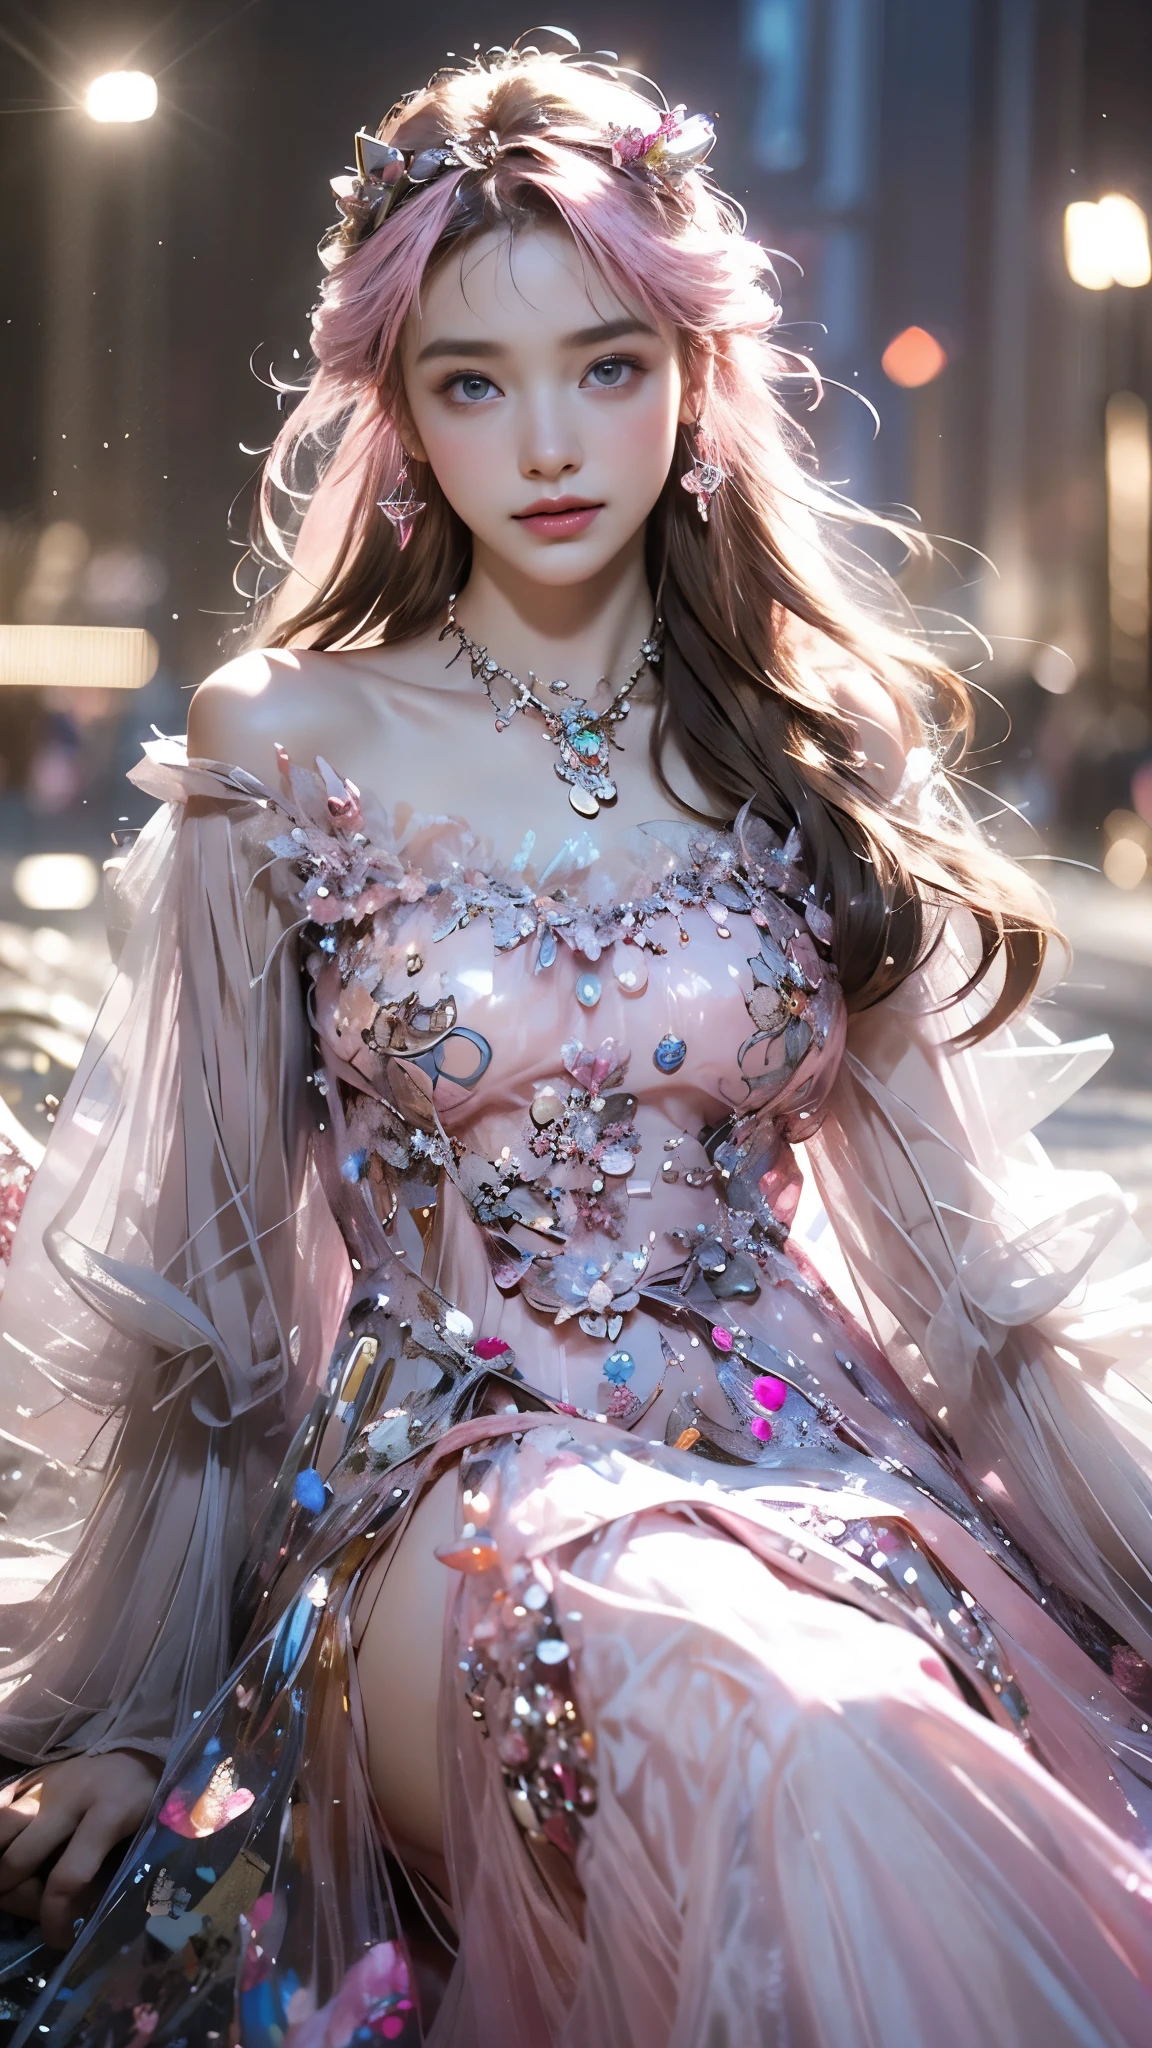 8K, ultra hd, masterpiece, 1 girl, (good face:1.4), detailed eyes, very long hair, impressive hairstyle, earings, necklace, small breasts, (pink dress:1.5), see-through, (fantasy dress:1.5) Light-colored foundation brings out the transparency of the skin, (in the wonderland:1.5), mystery, diwali lights, glowing lights, very decoration, The lights falls like water, perfect front body, sitting,